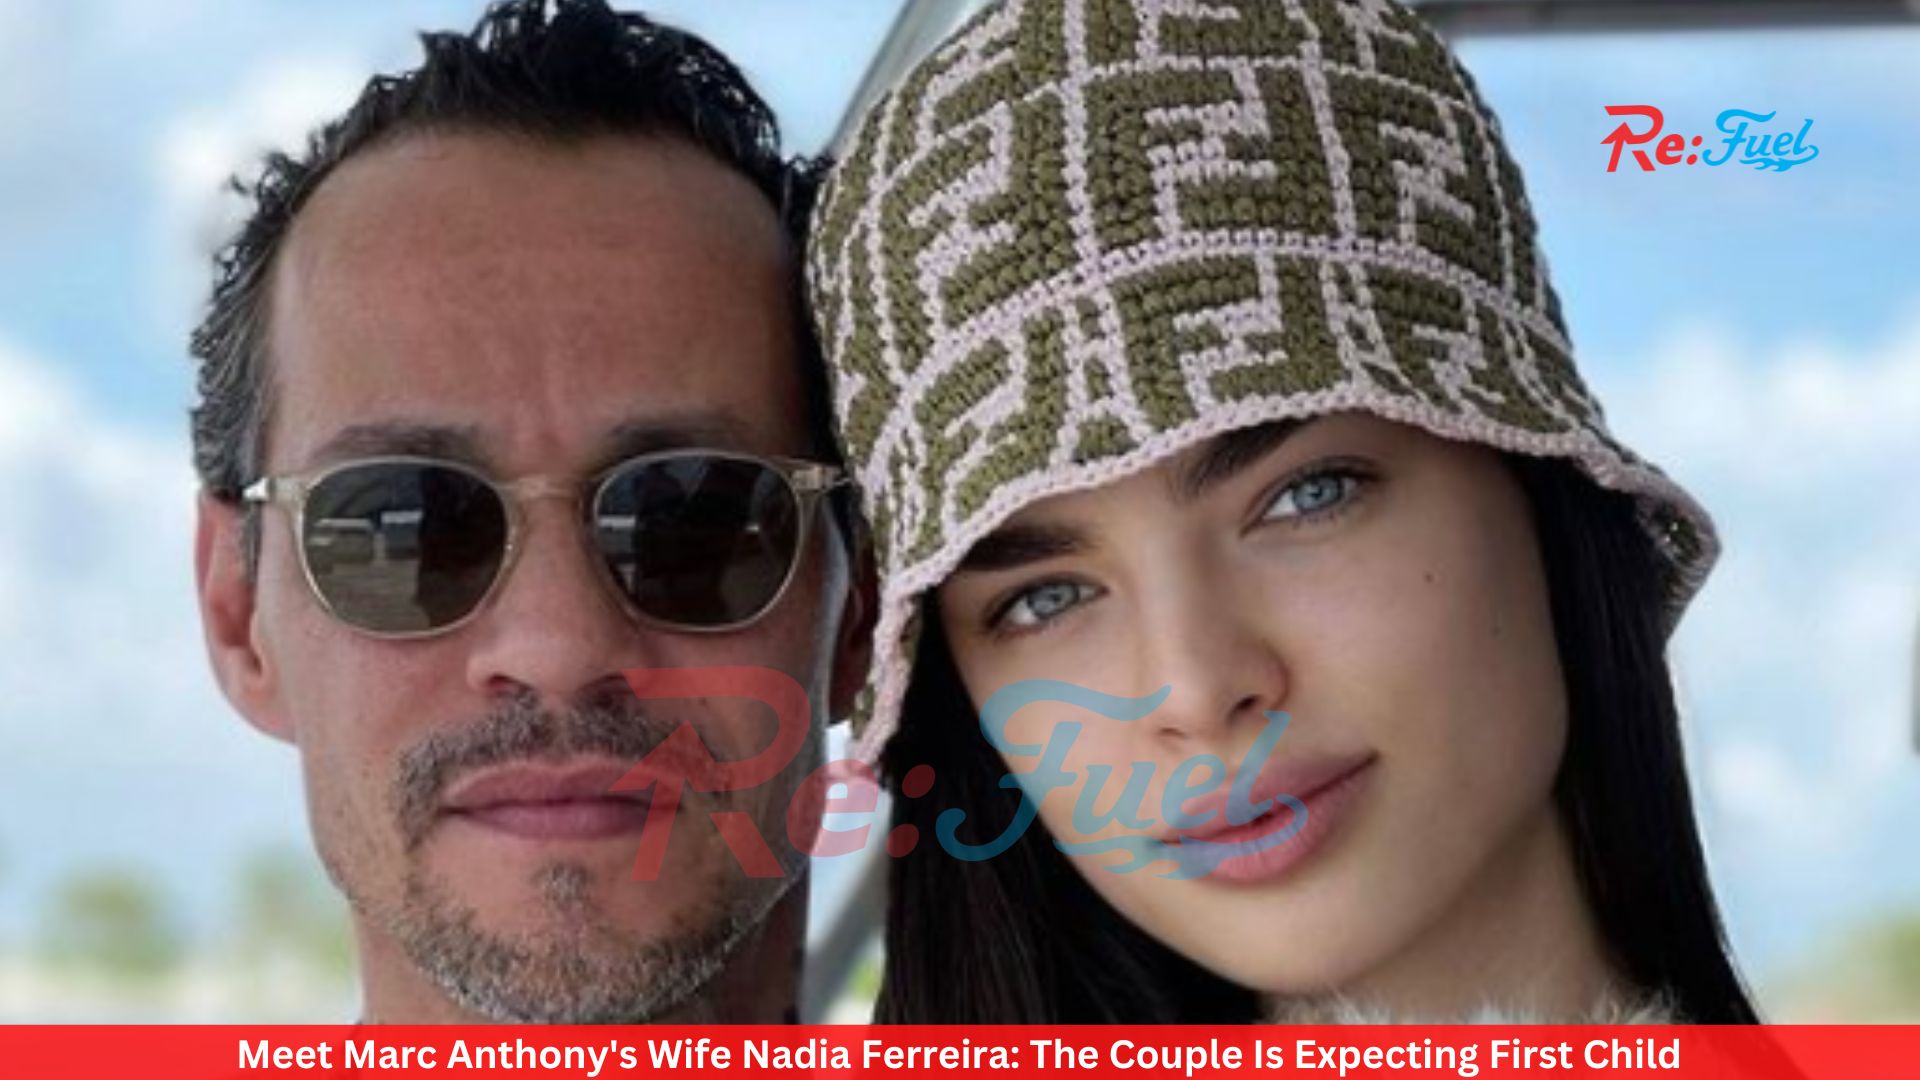 Meet Marc Anthony's Wife Nadia Ferreira: The Couple Is Expecting First Child